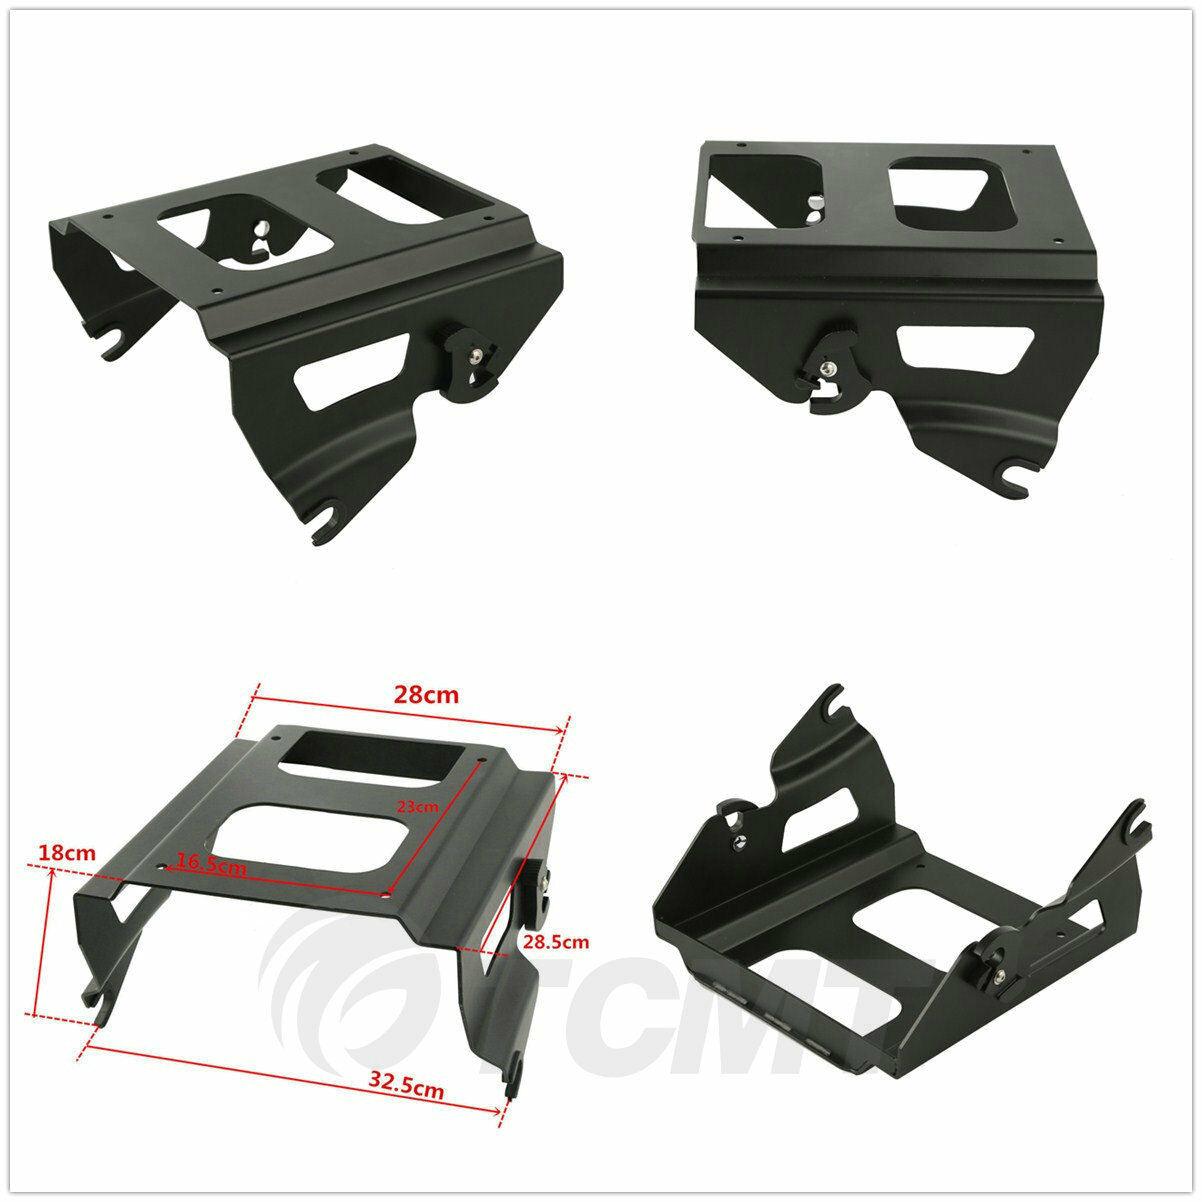 Black Solo Mount Rack For Harley Tou Pak Touring Road King Street Glide 09-13 US - Moto Life Products